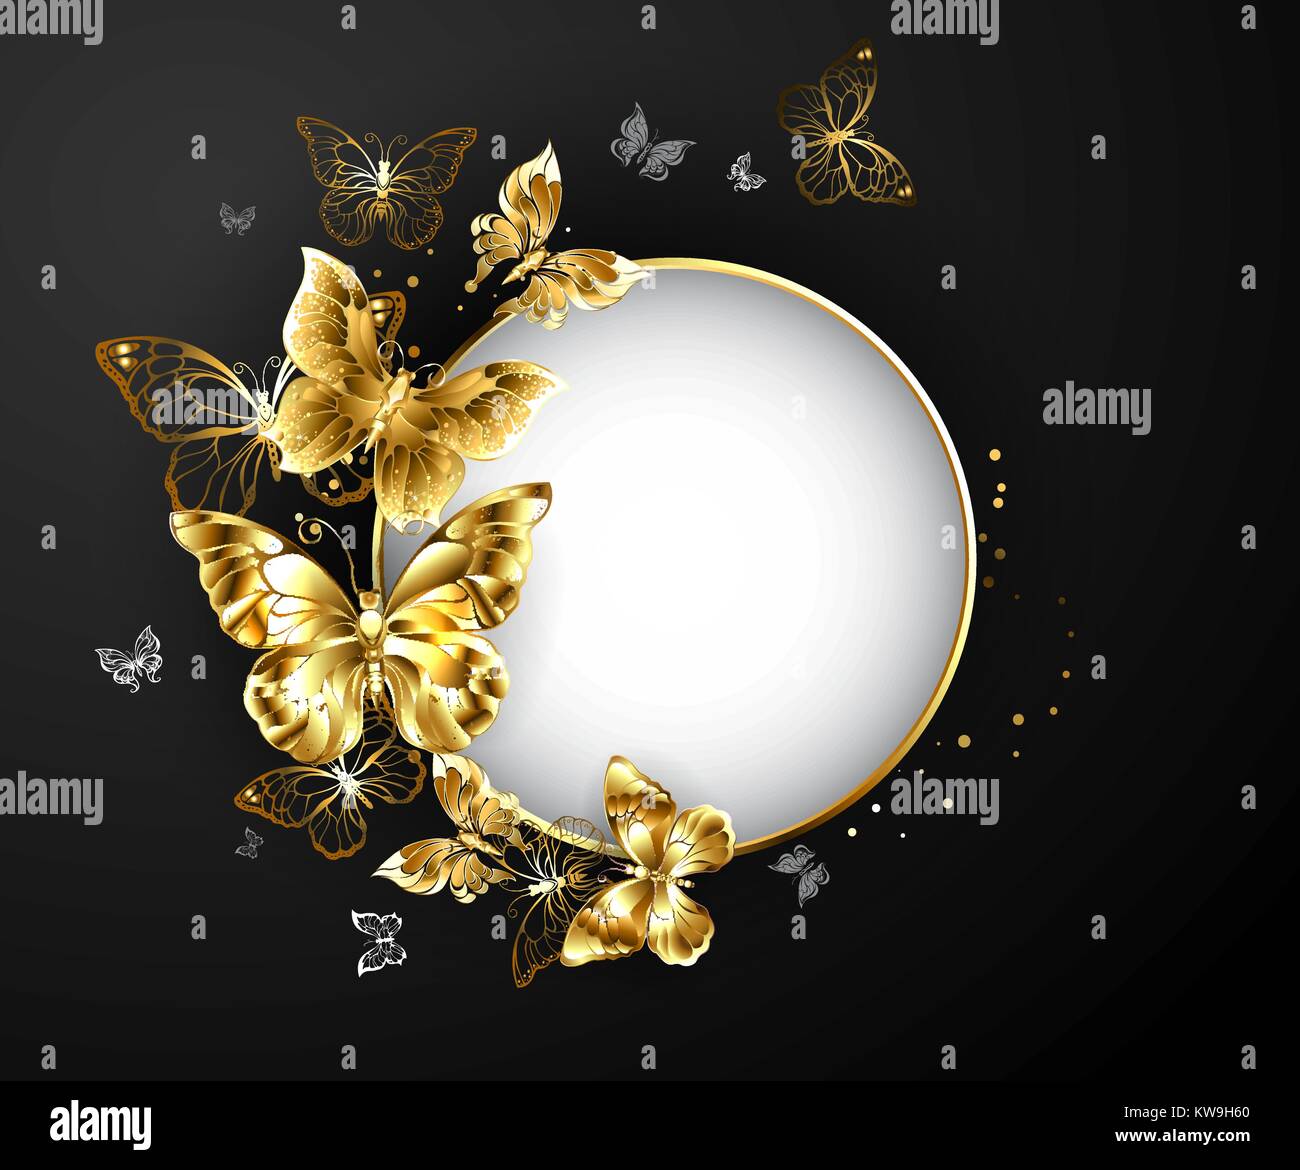 Round banner with gold frame, decorated with gold jewelry butterflies on a black background.  Golden Butterfly. Design with butterflies. Stock Vector